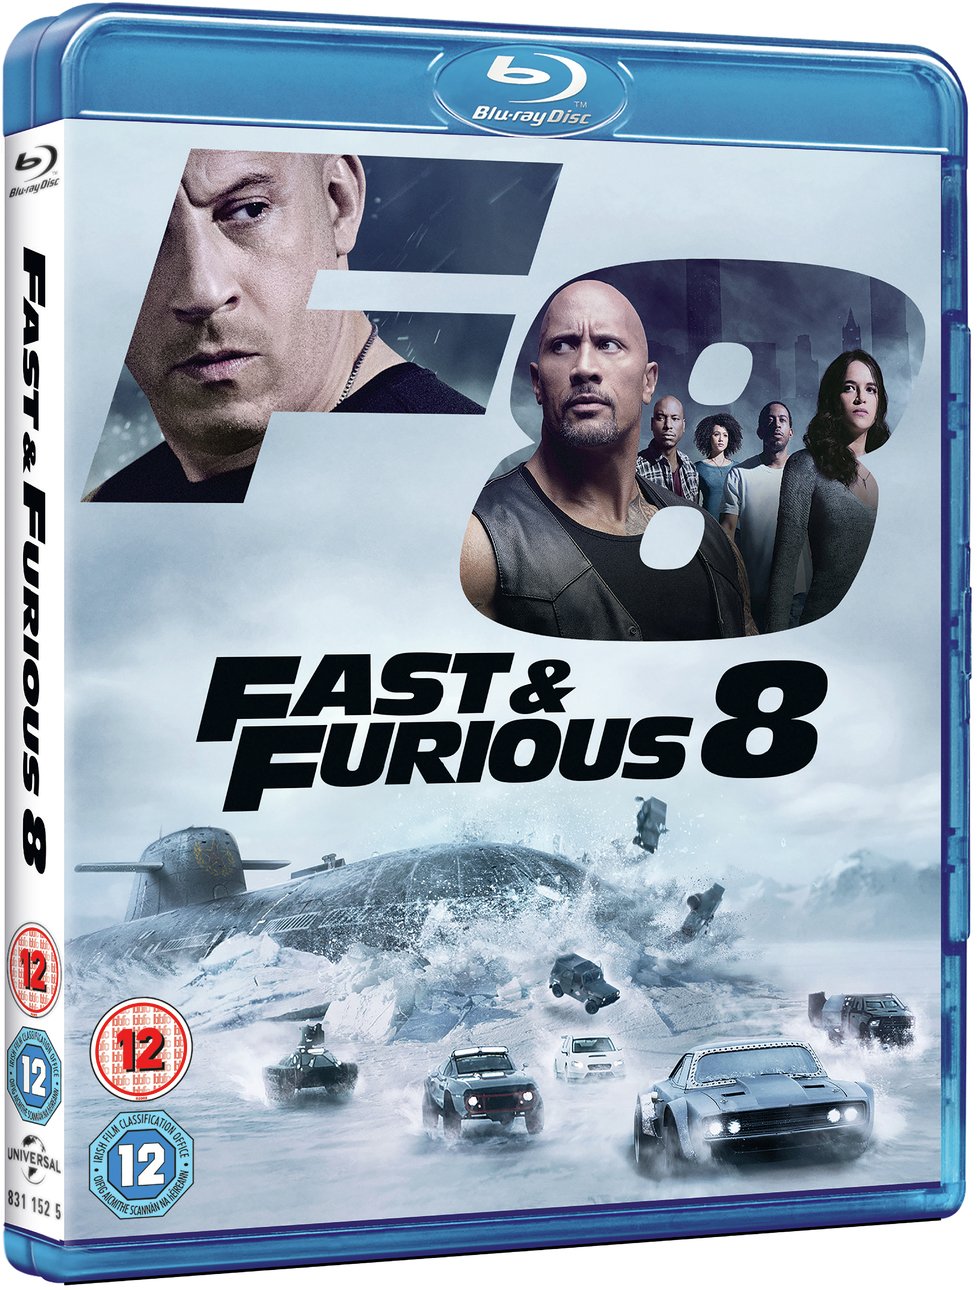 Fast & Furious 8 Blu-ray Review